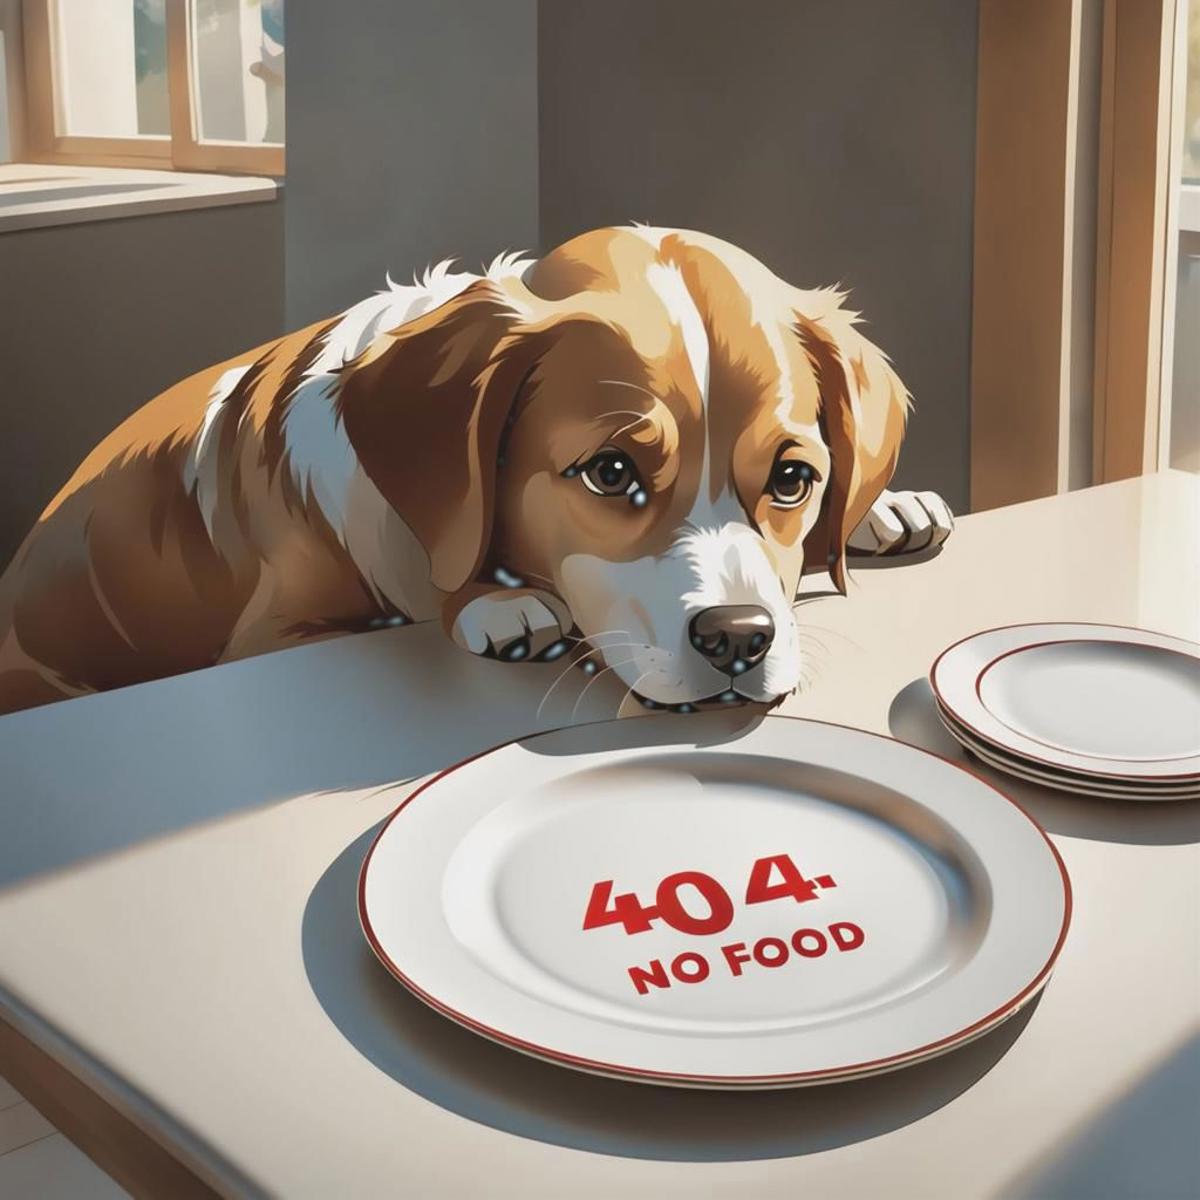 A Sad Dog Looking at an Empty Plate with "404 Food" on it.